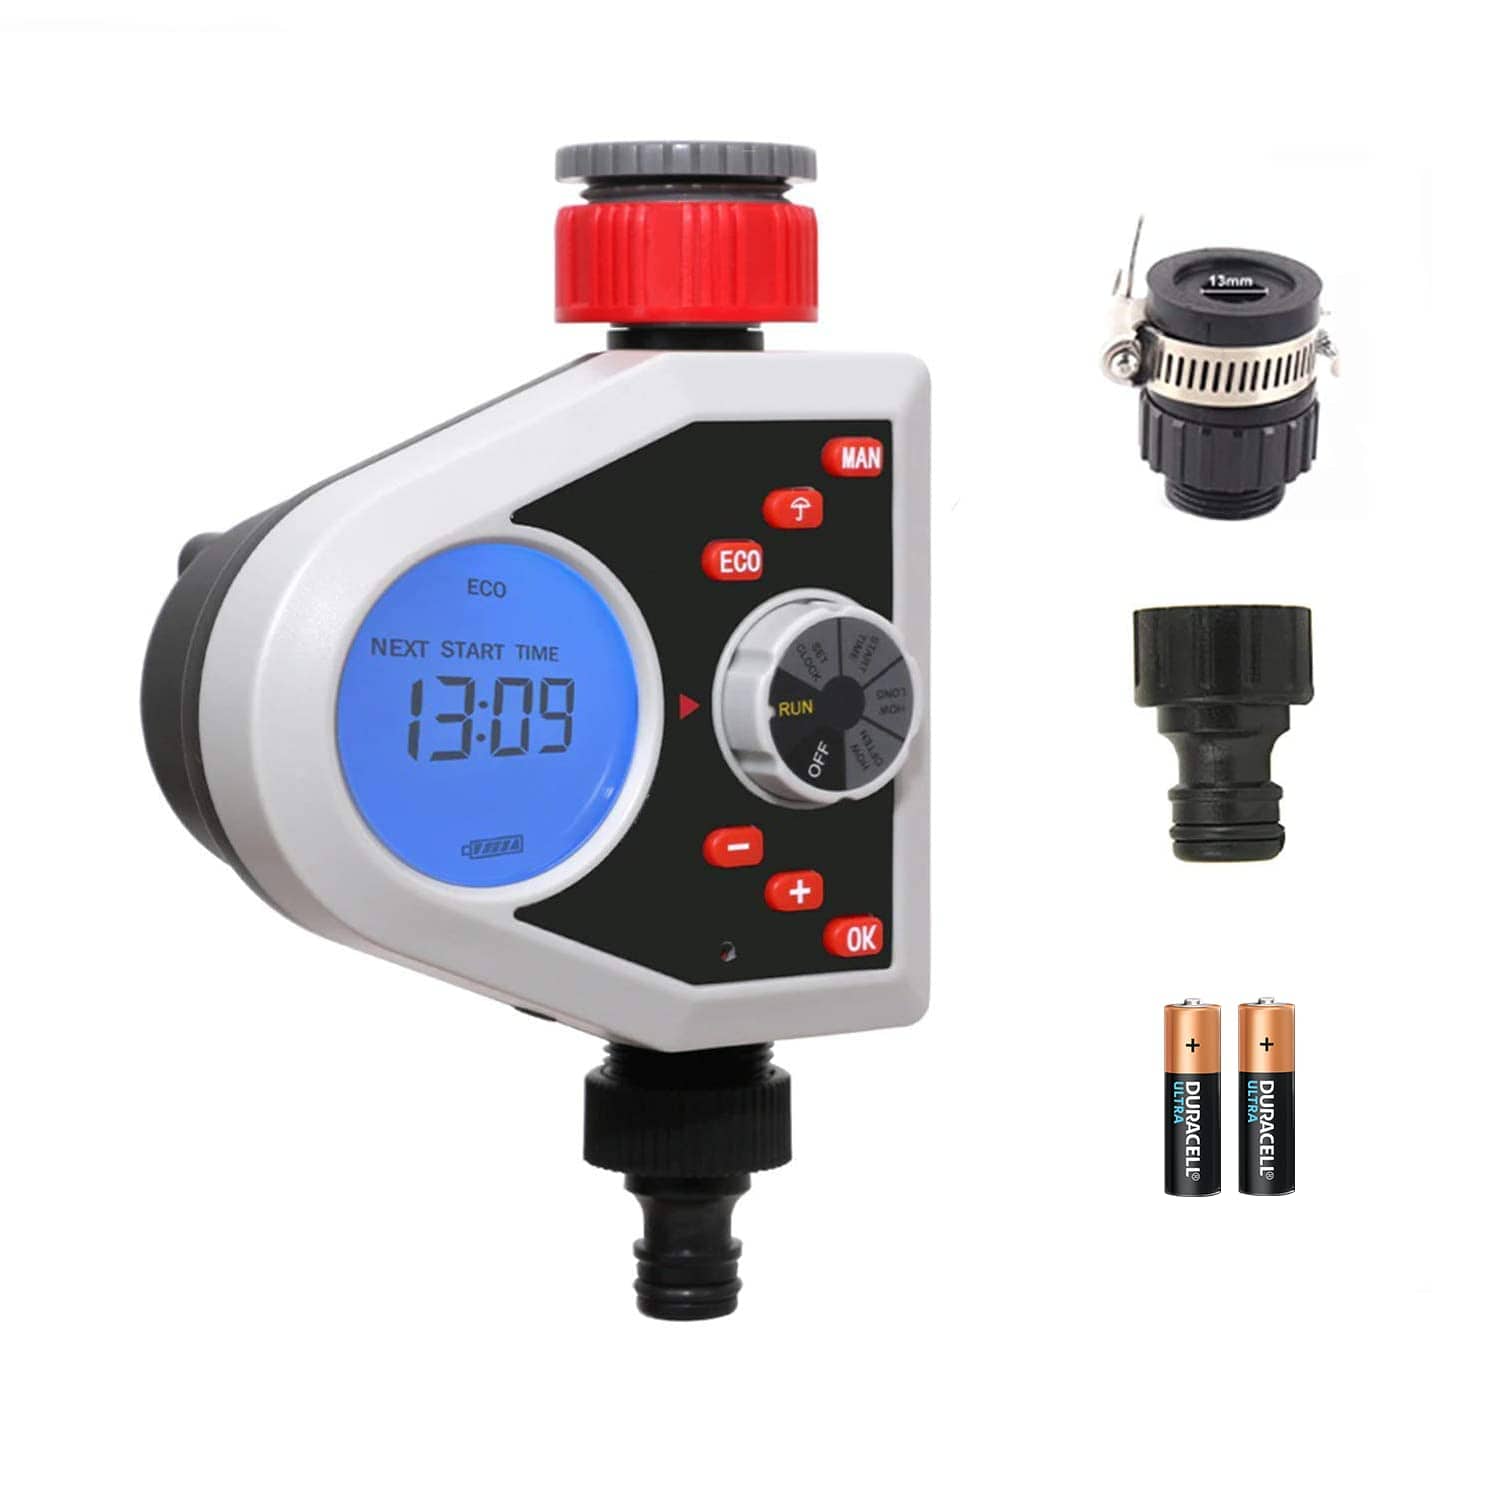 Aqualin Drip Irrigation Water Timer With Solenoid Valve (Fully Automatic, LCD Display And Batteries Included)